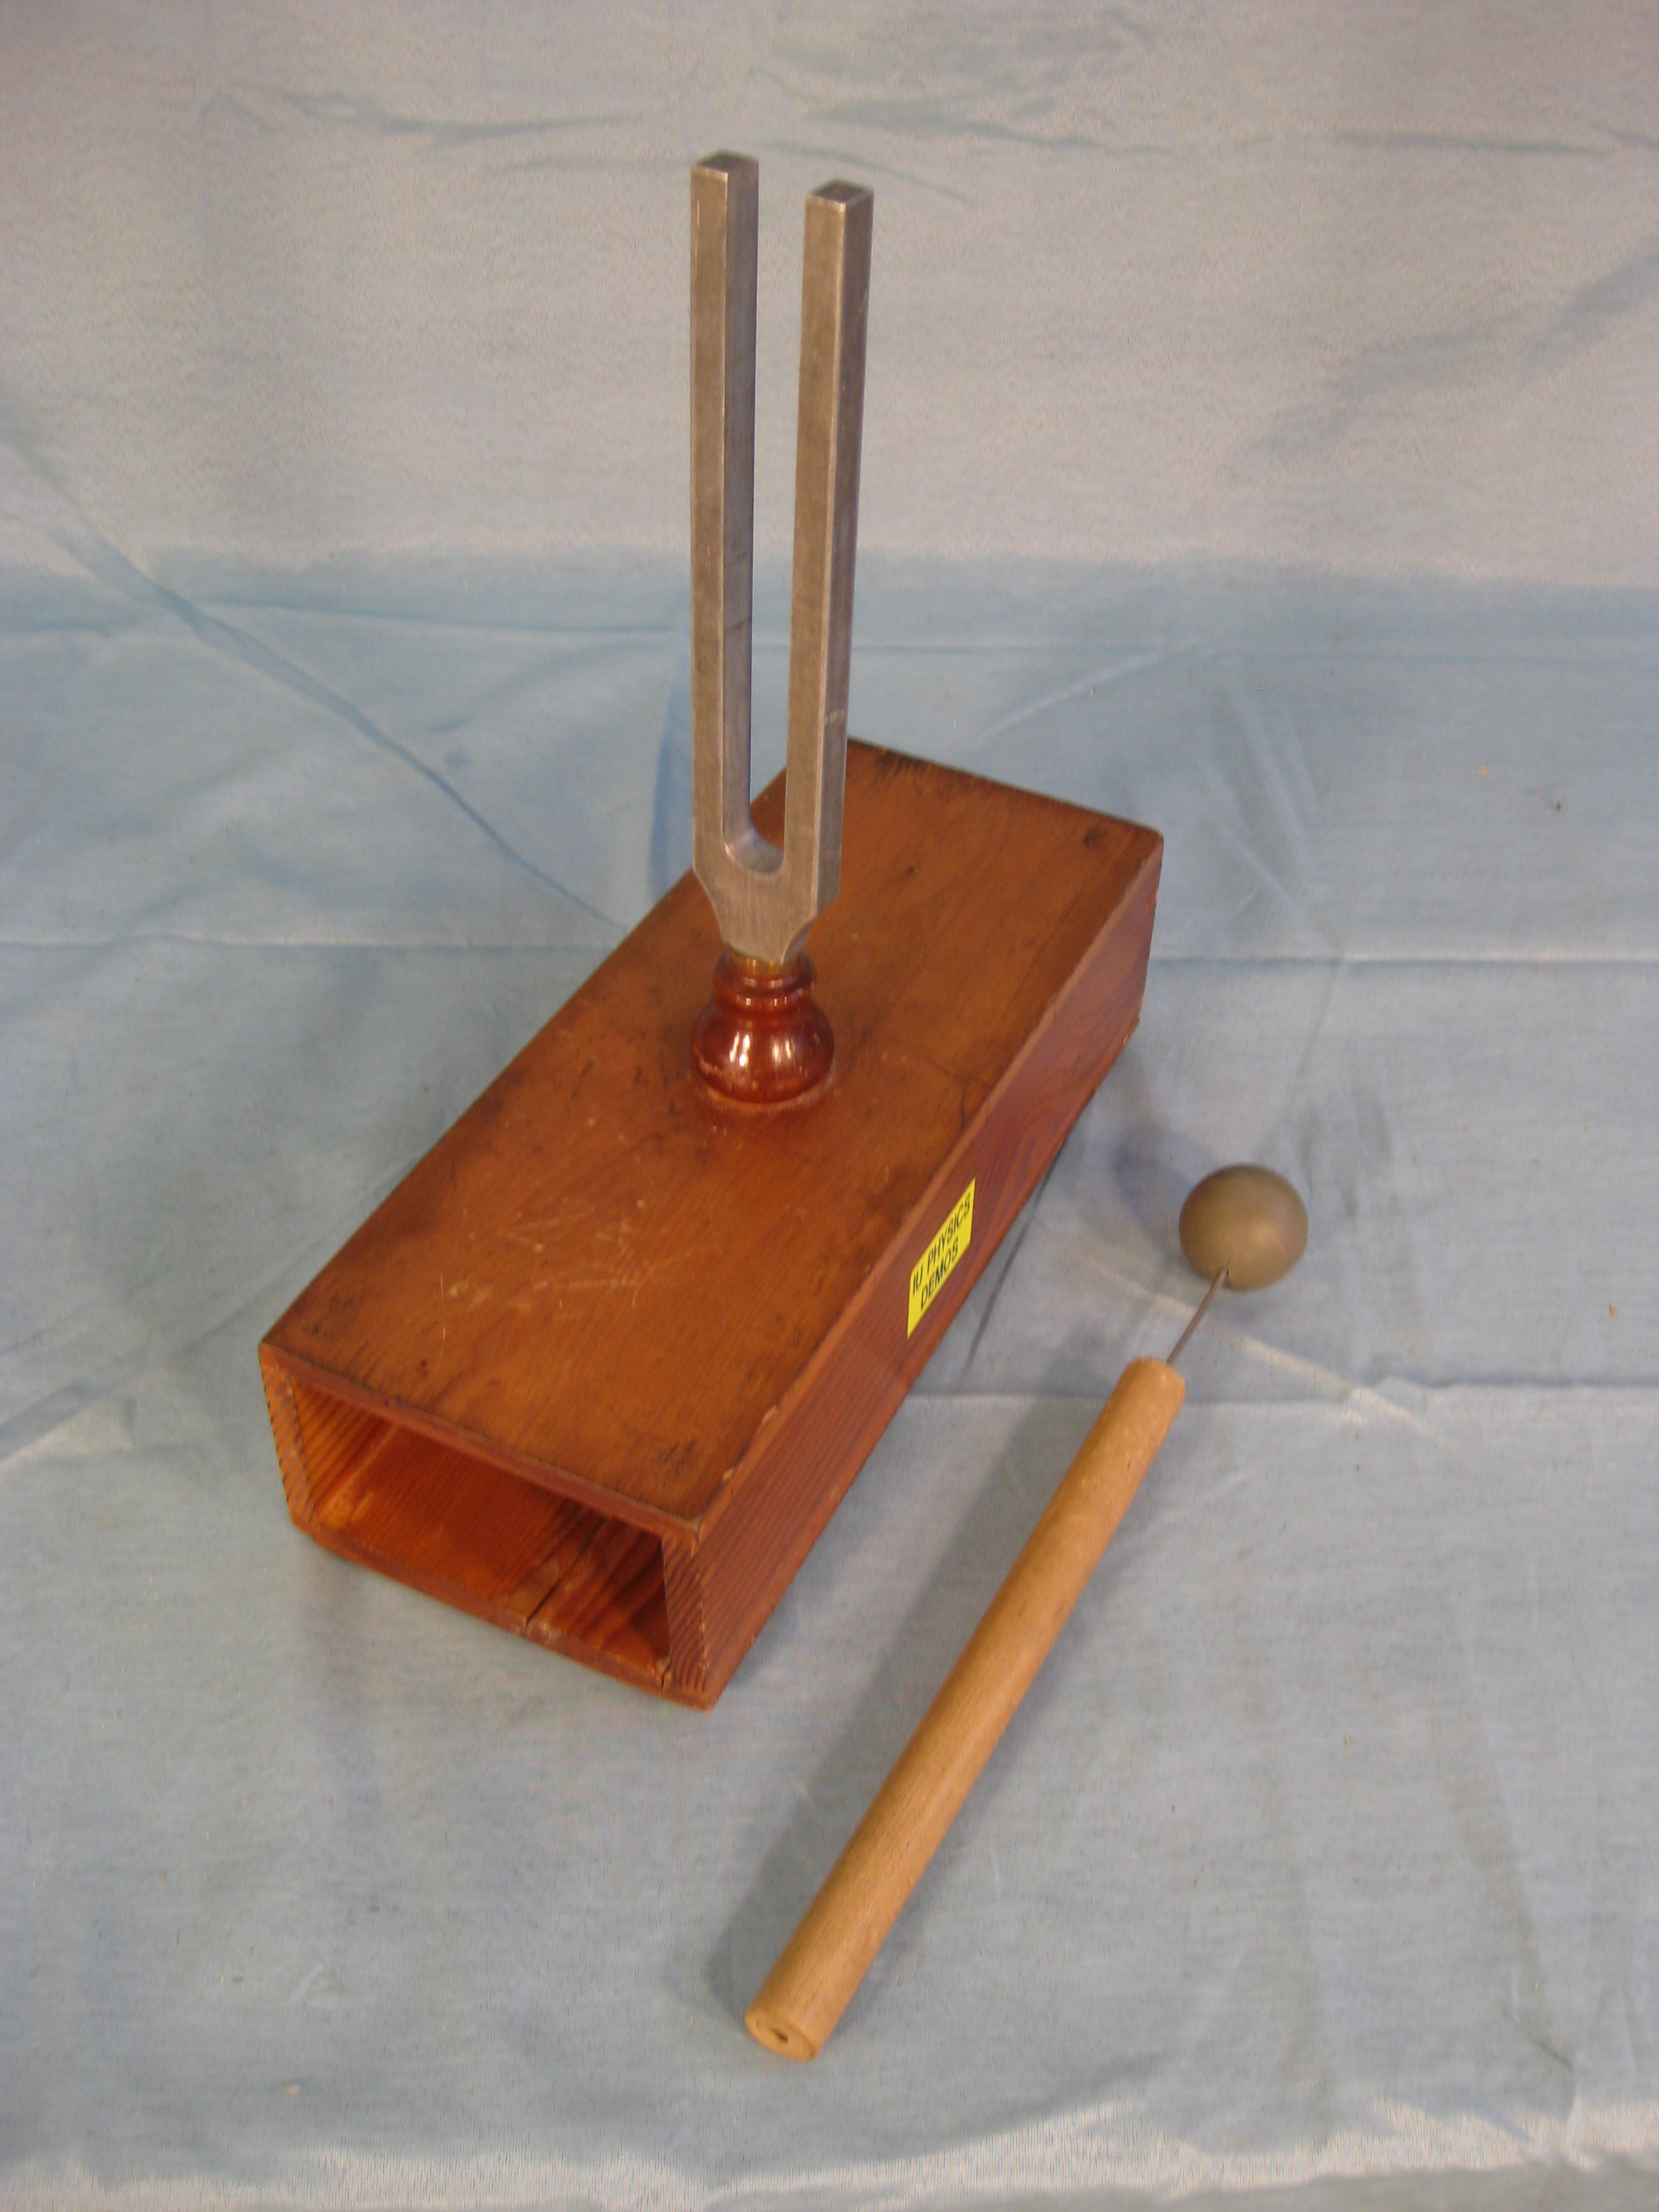 Tuning forks with resonators.